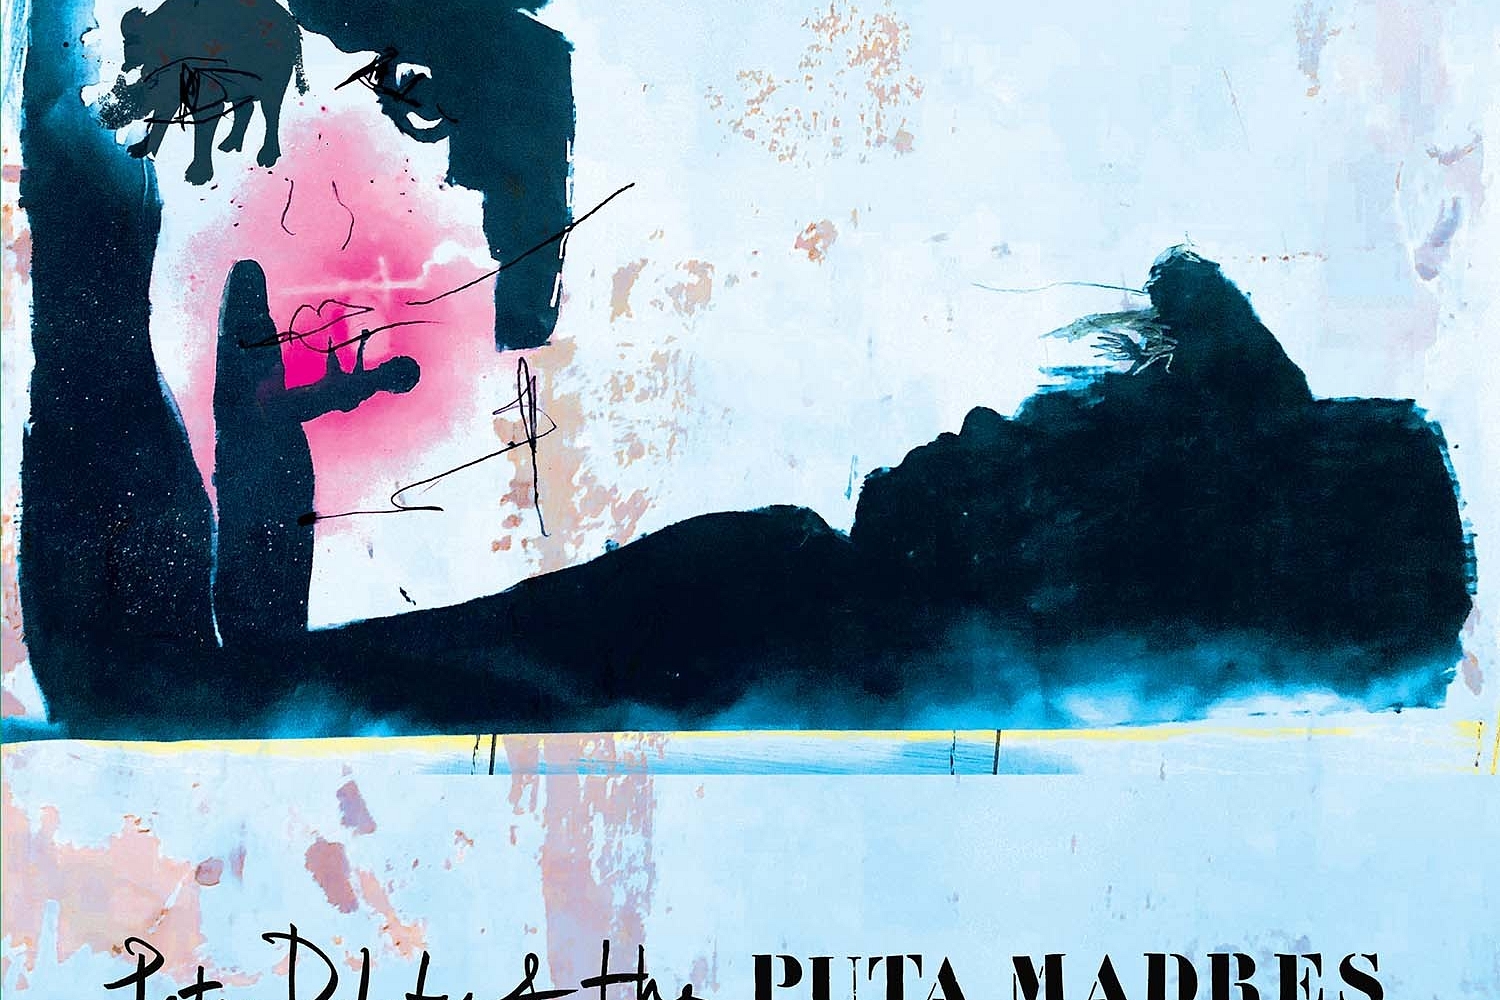 Peter Doherty & the Puta Madres - Peter Doherty & the Puta Madres